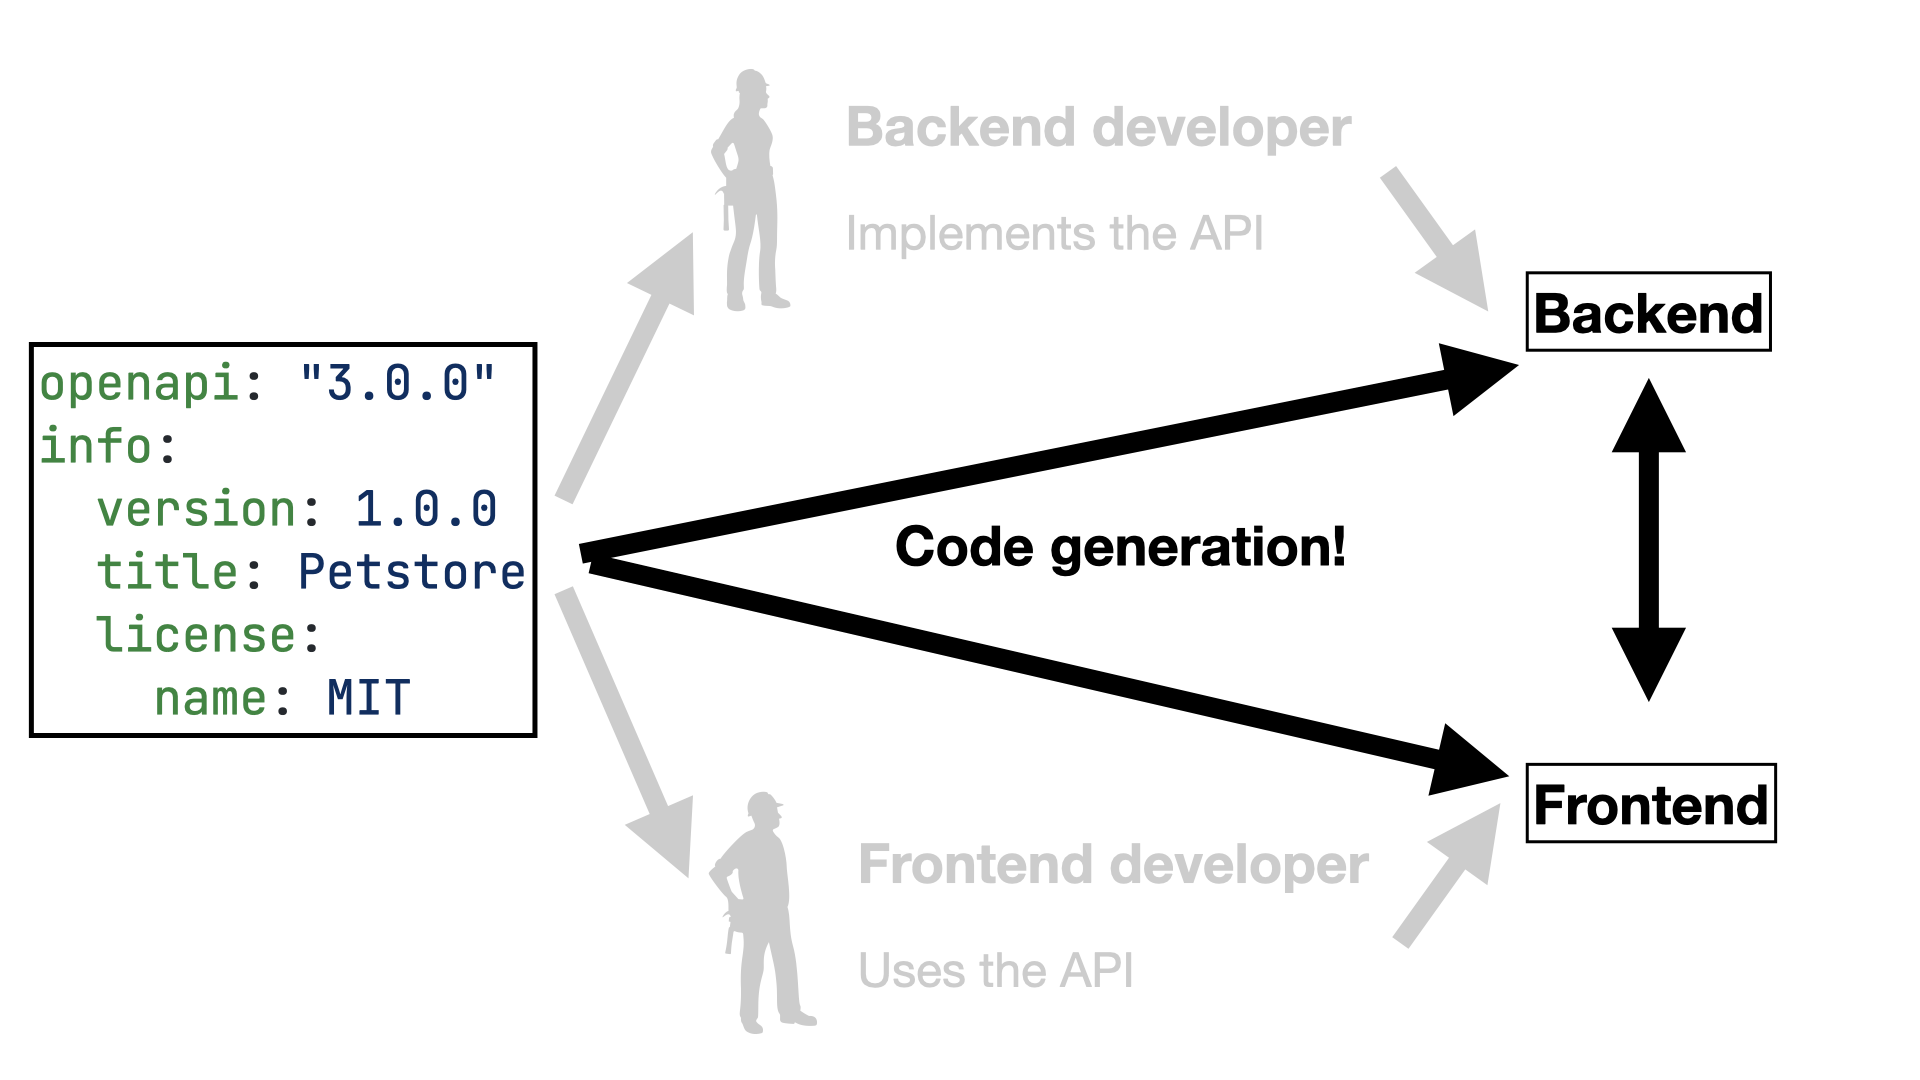 Code generation guarantees the implementations will coinside